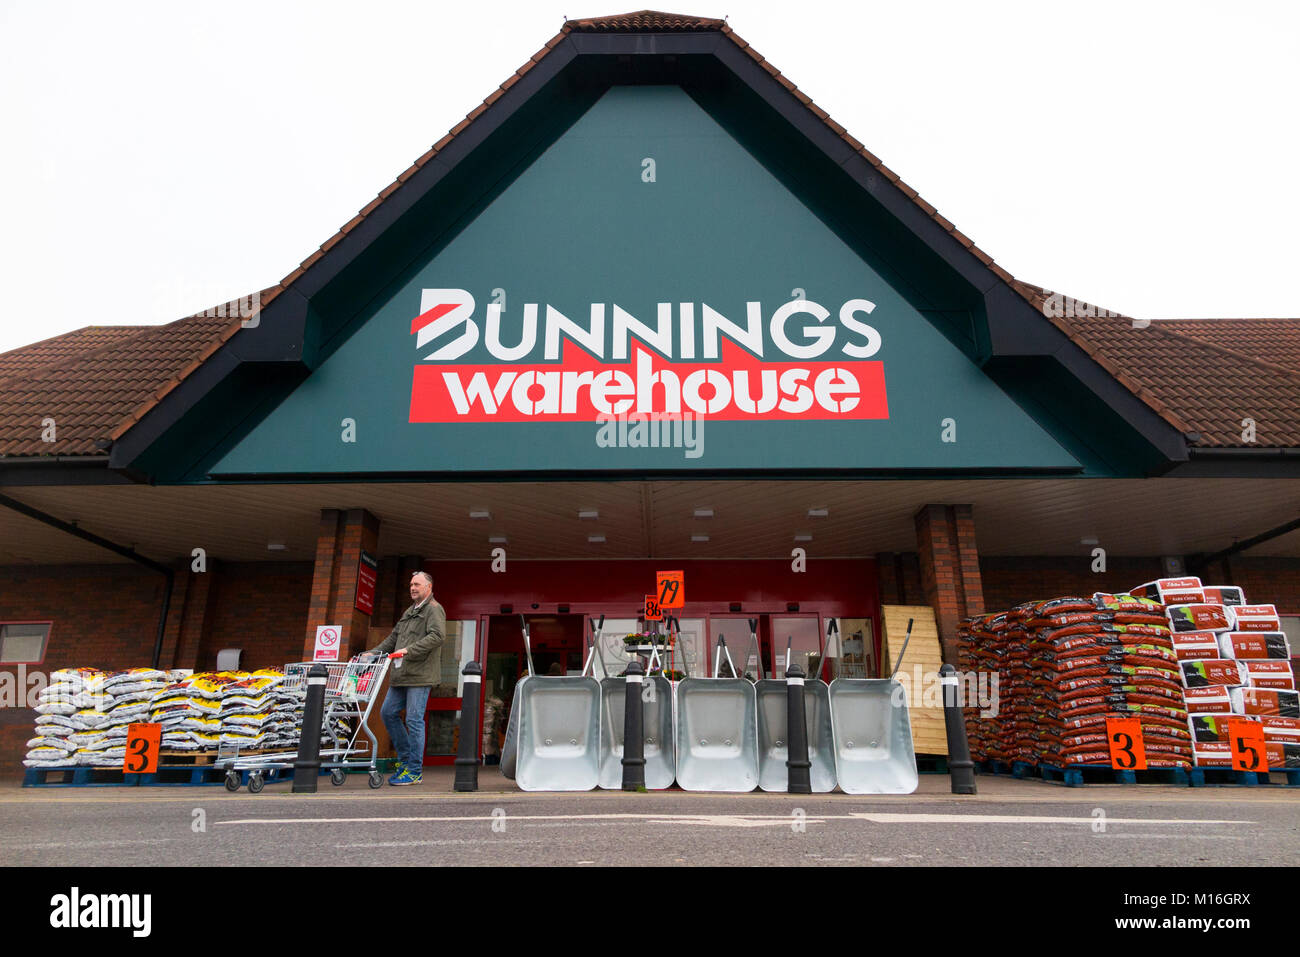 General exterior view with logo outside a new UK Bunnings Warehouse DIY super store and trade / domestic home improvement shop / retailer. UK. (94 Photo - Alamy